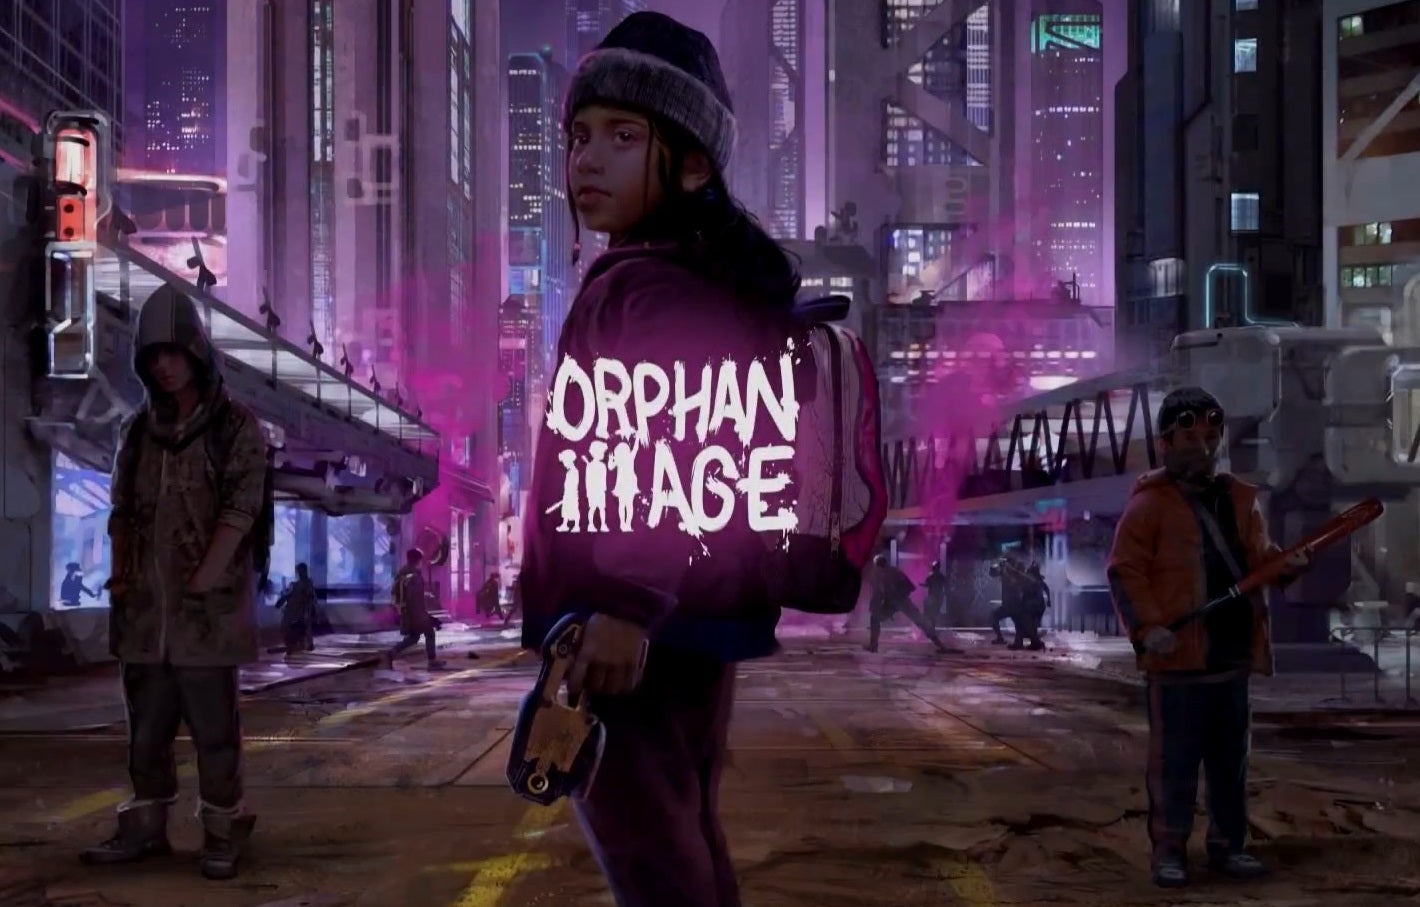 Image for Orphan Age is a management sim where you look after a band of orphans in a cyberpunk dystopia